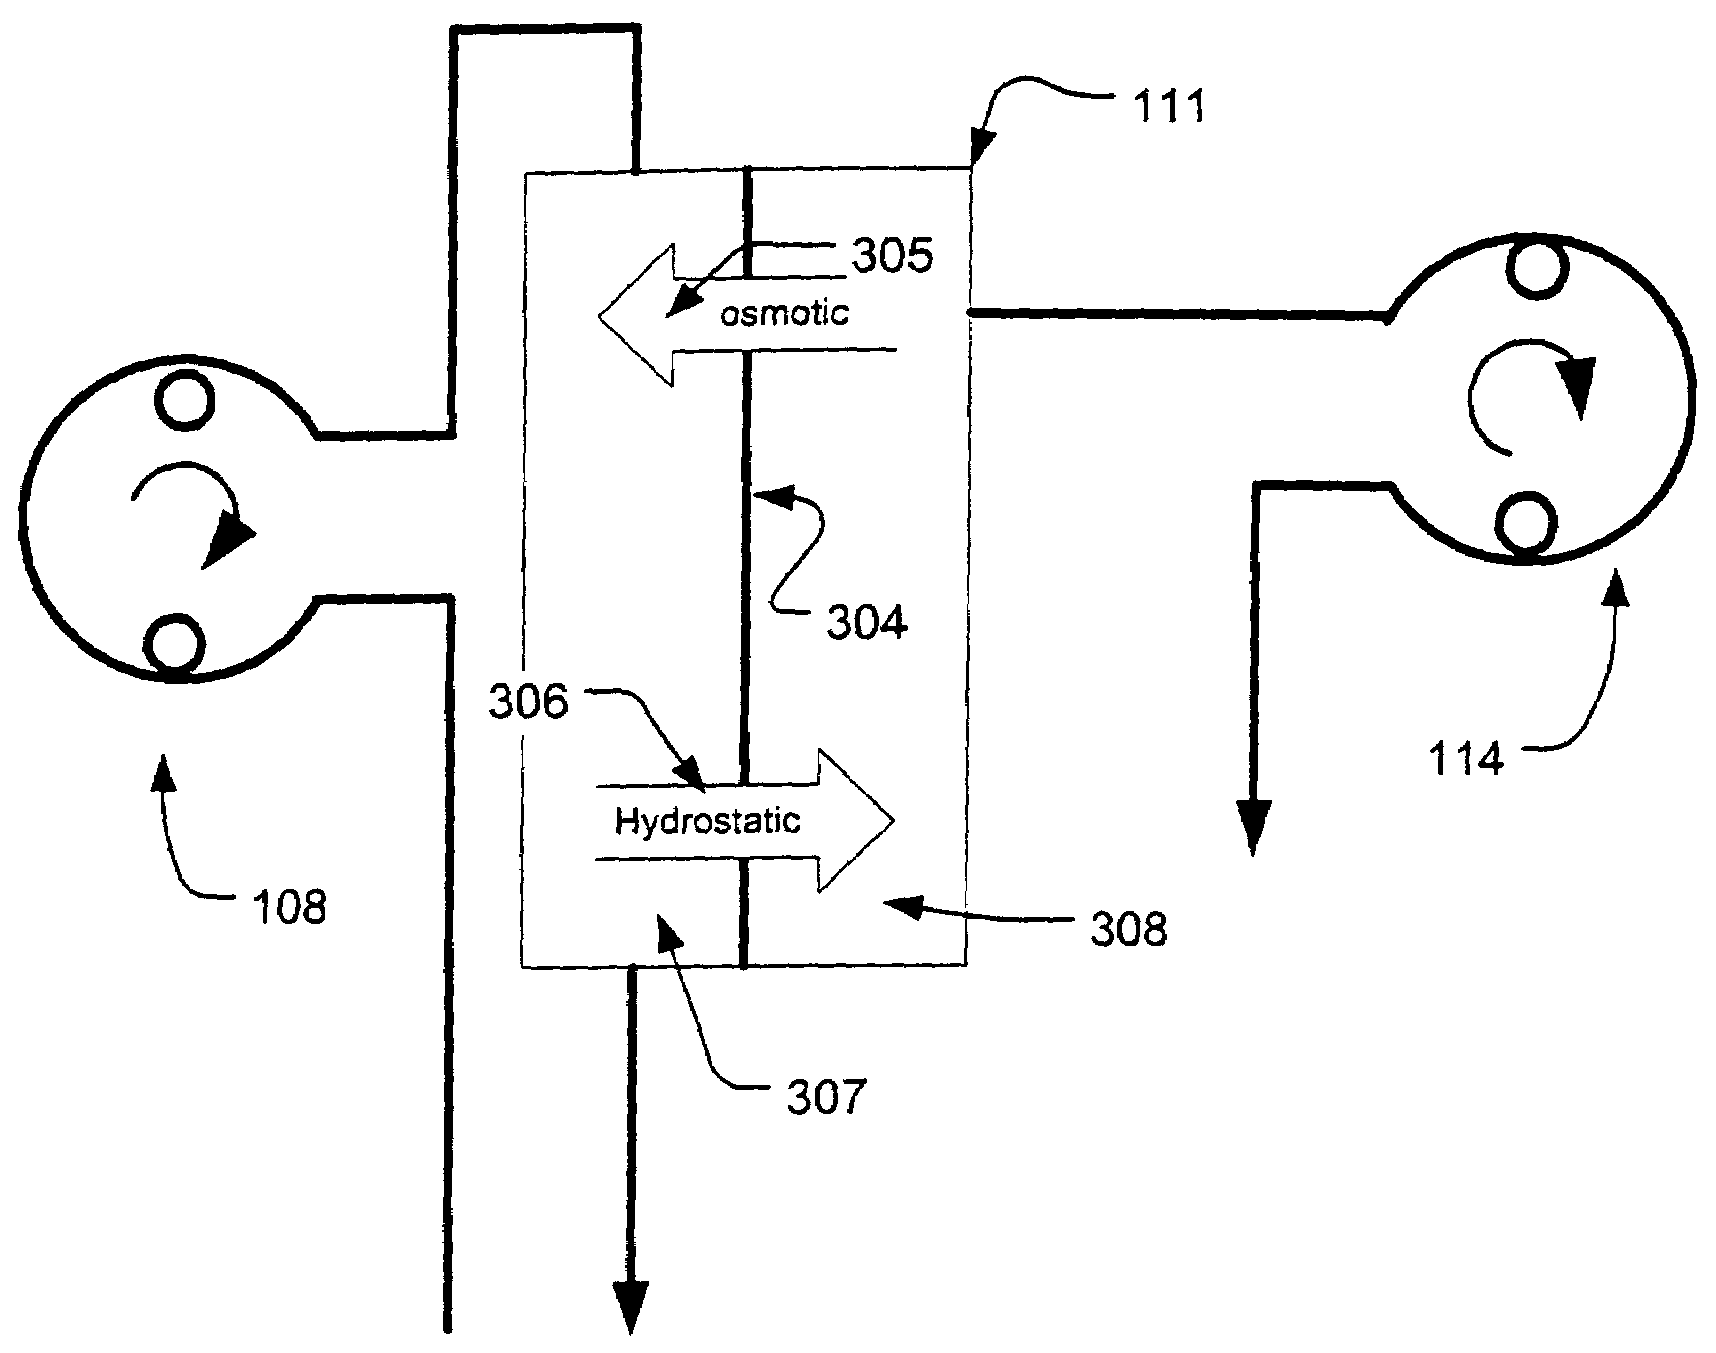 Controller for ultrafiltration blood circuit which prevents hypotension by monitoring osmotic pressure in blood